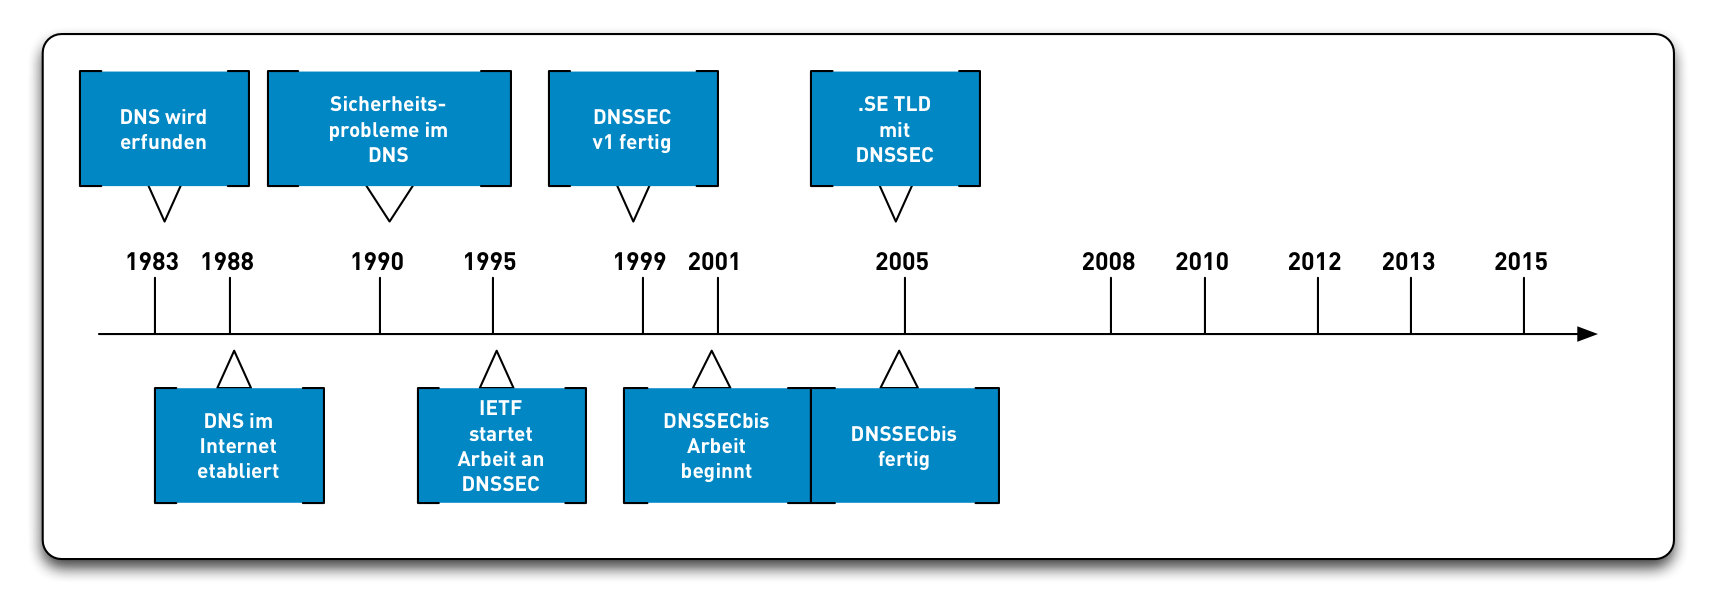 DNSSEC-History09.png